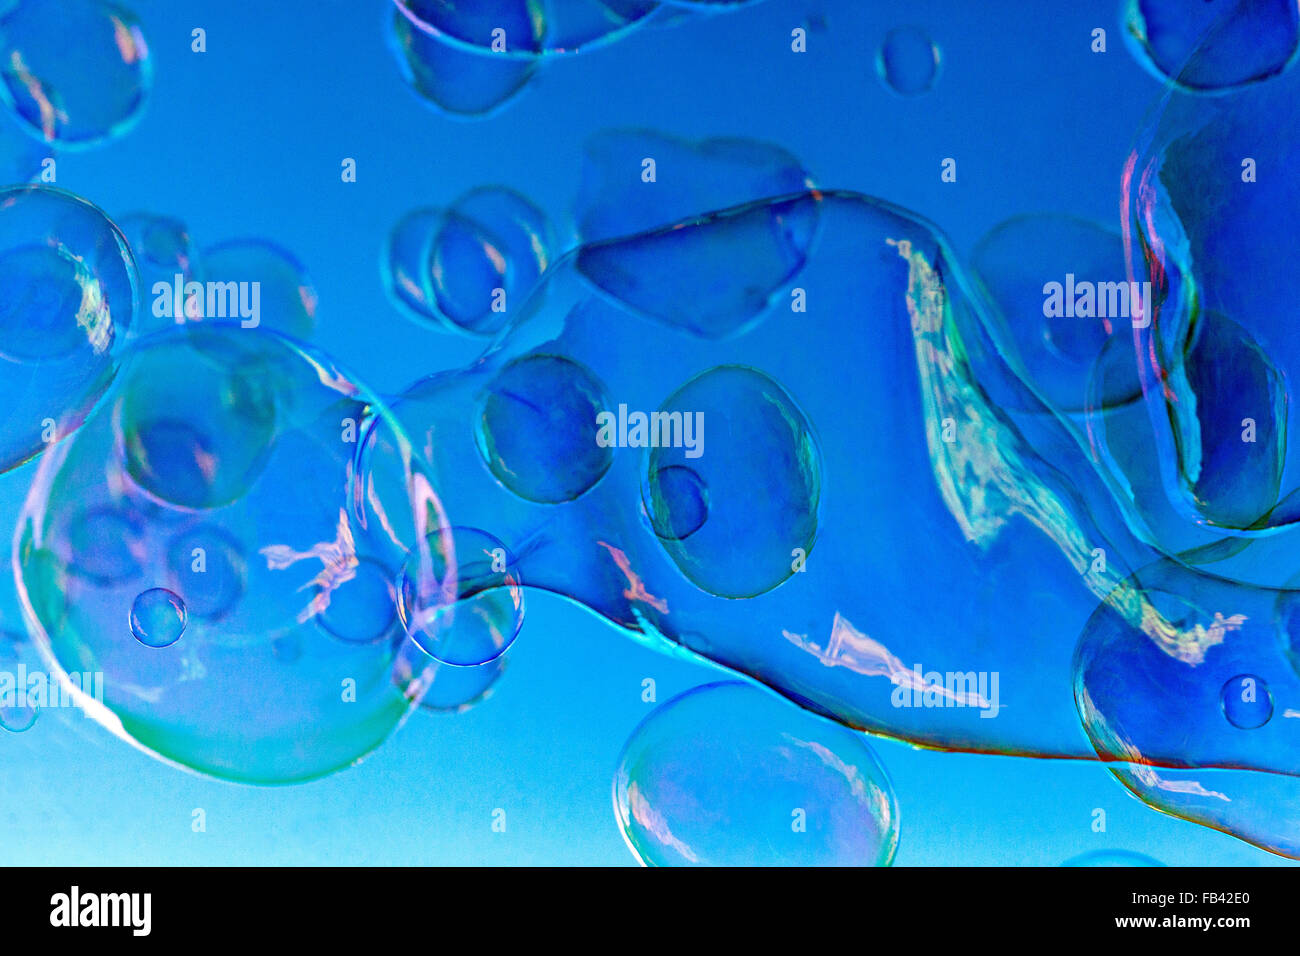 Soap bubbles on a blue background, abstract Stock Photo